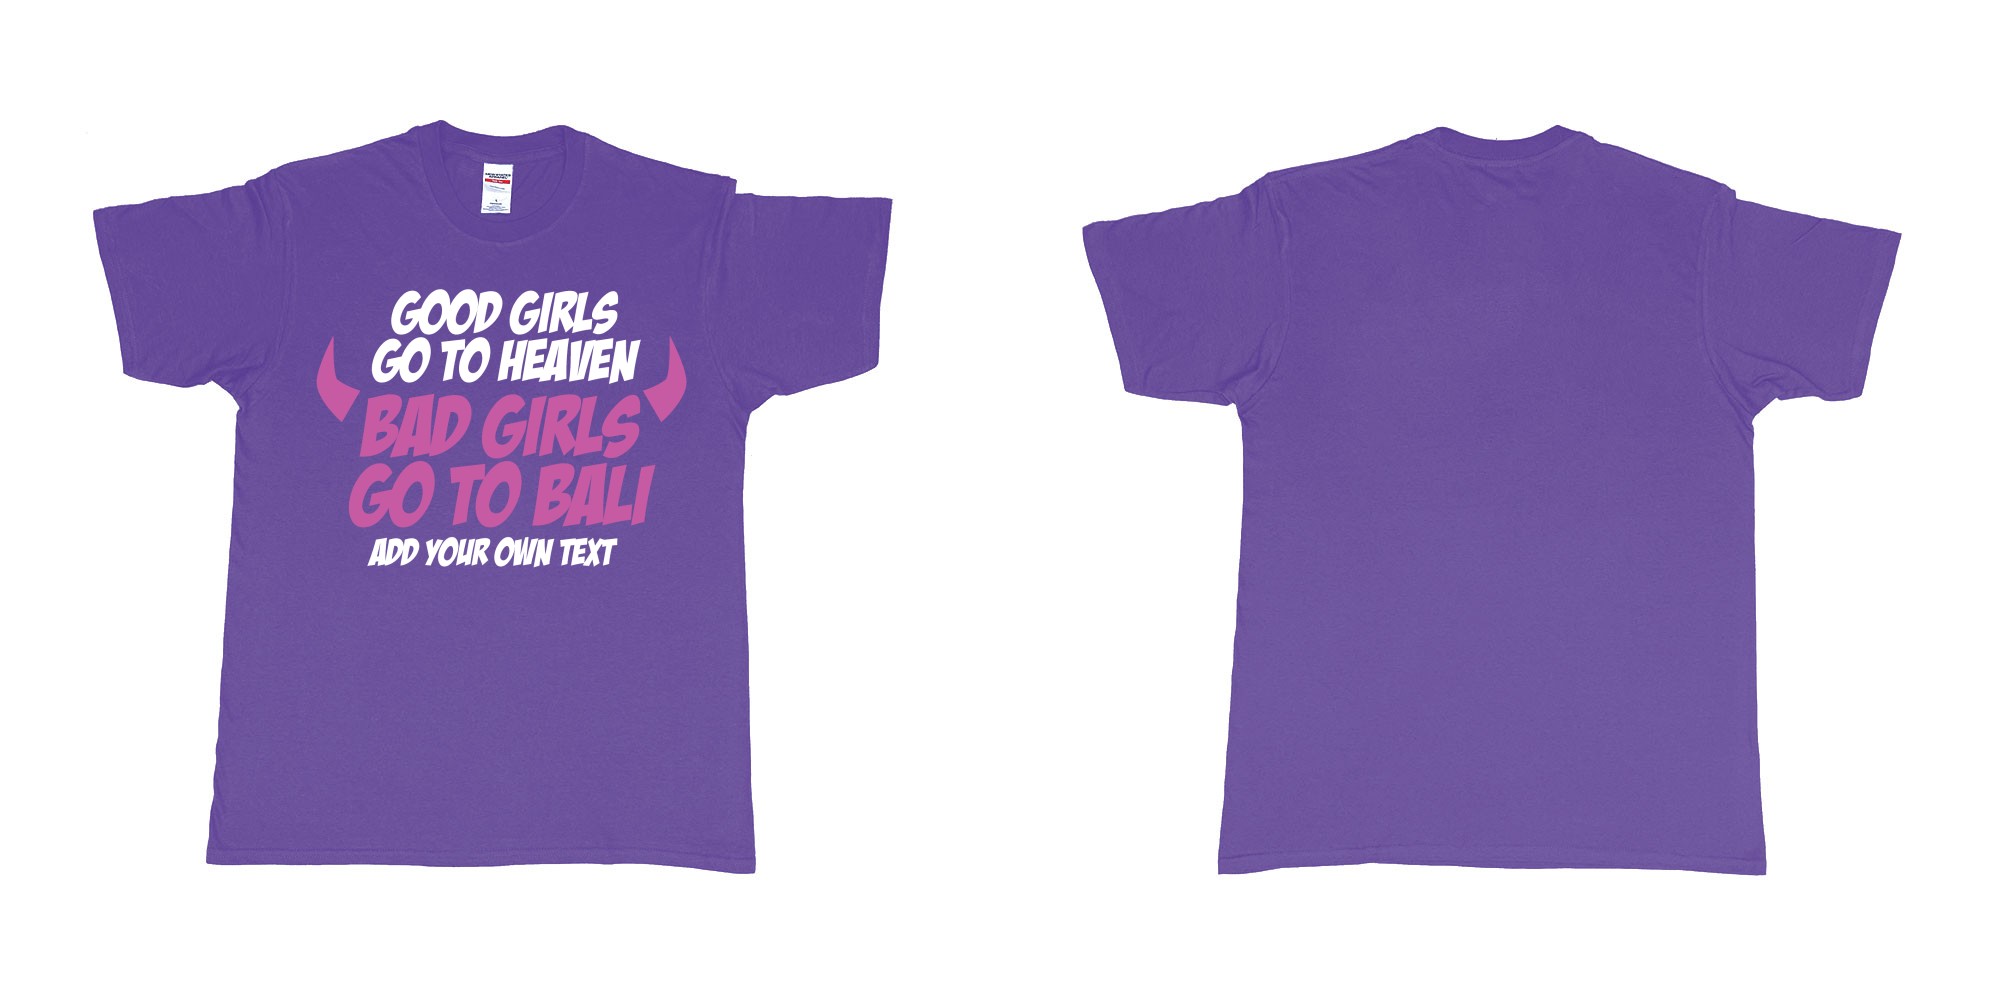 Custom tshirt design good girls go to heaven bad girls go to bali in fabric color purple choice your own text made in Bali by The Pirate Way